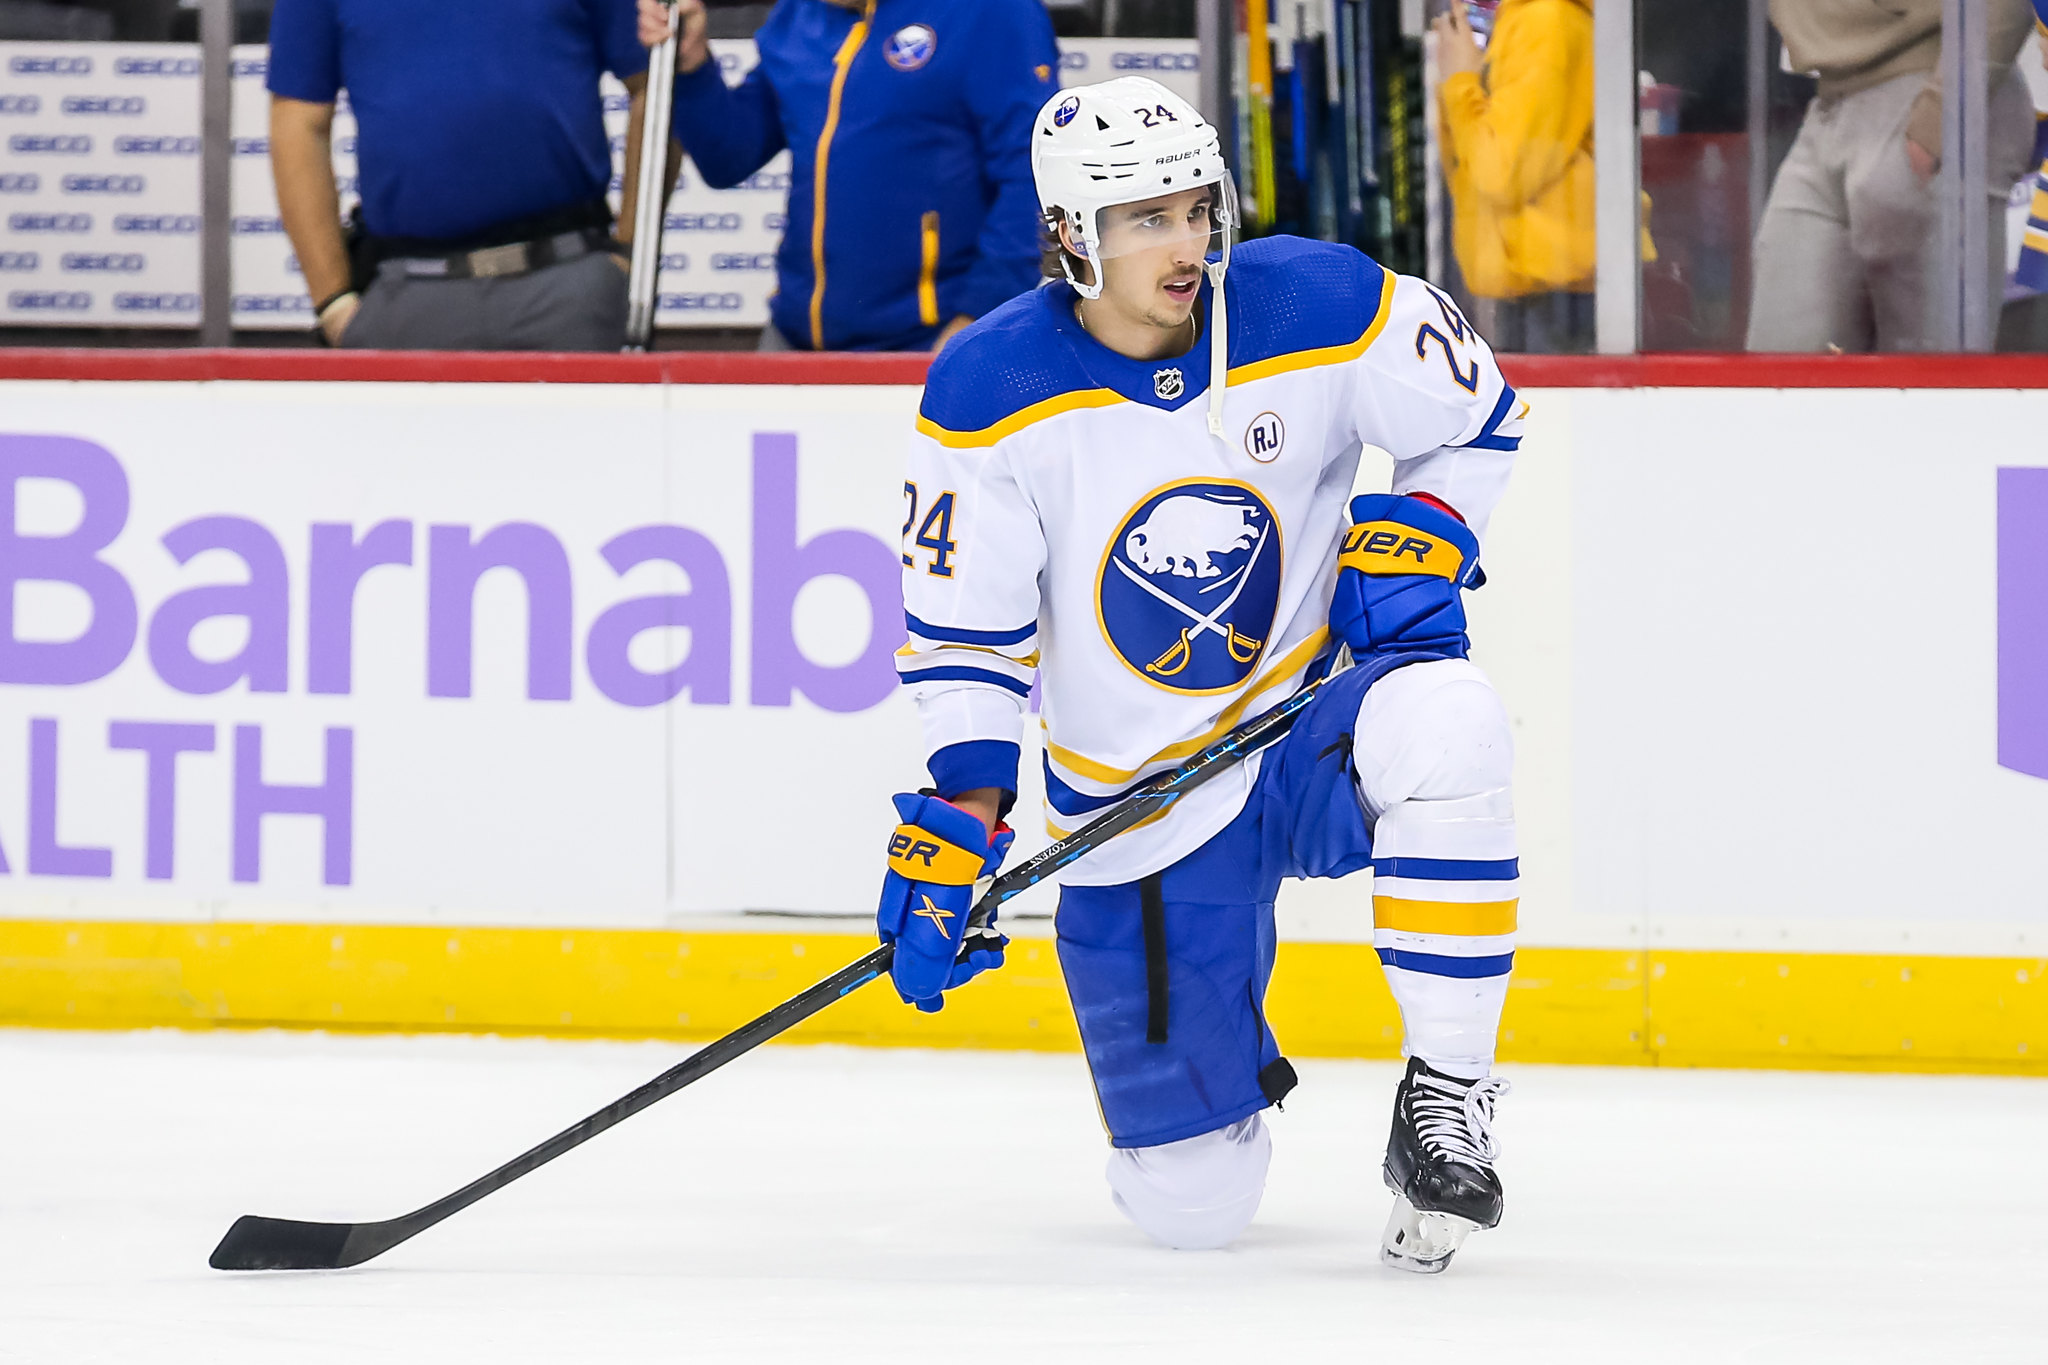 Sabres Are in Desperate Need of Scoring Help